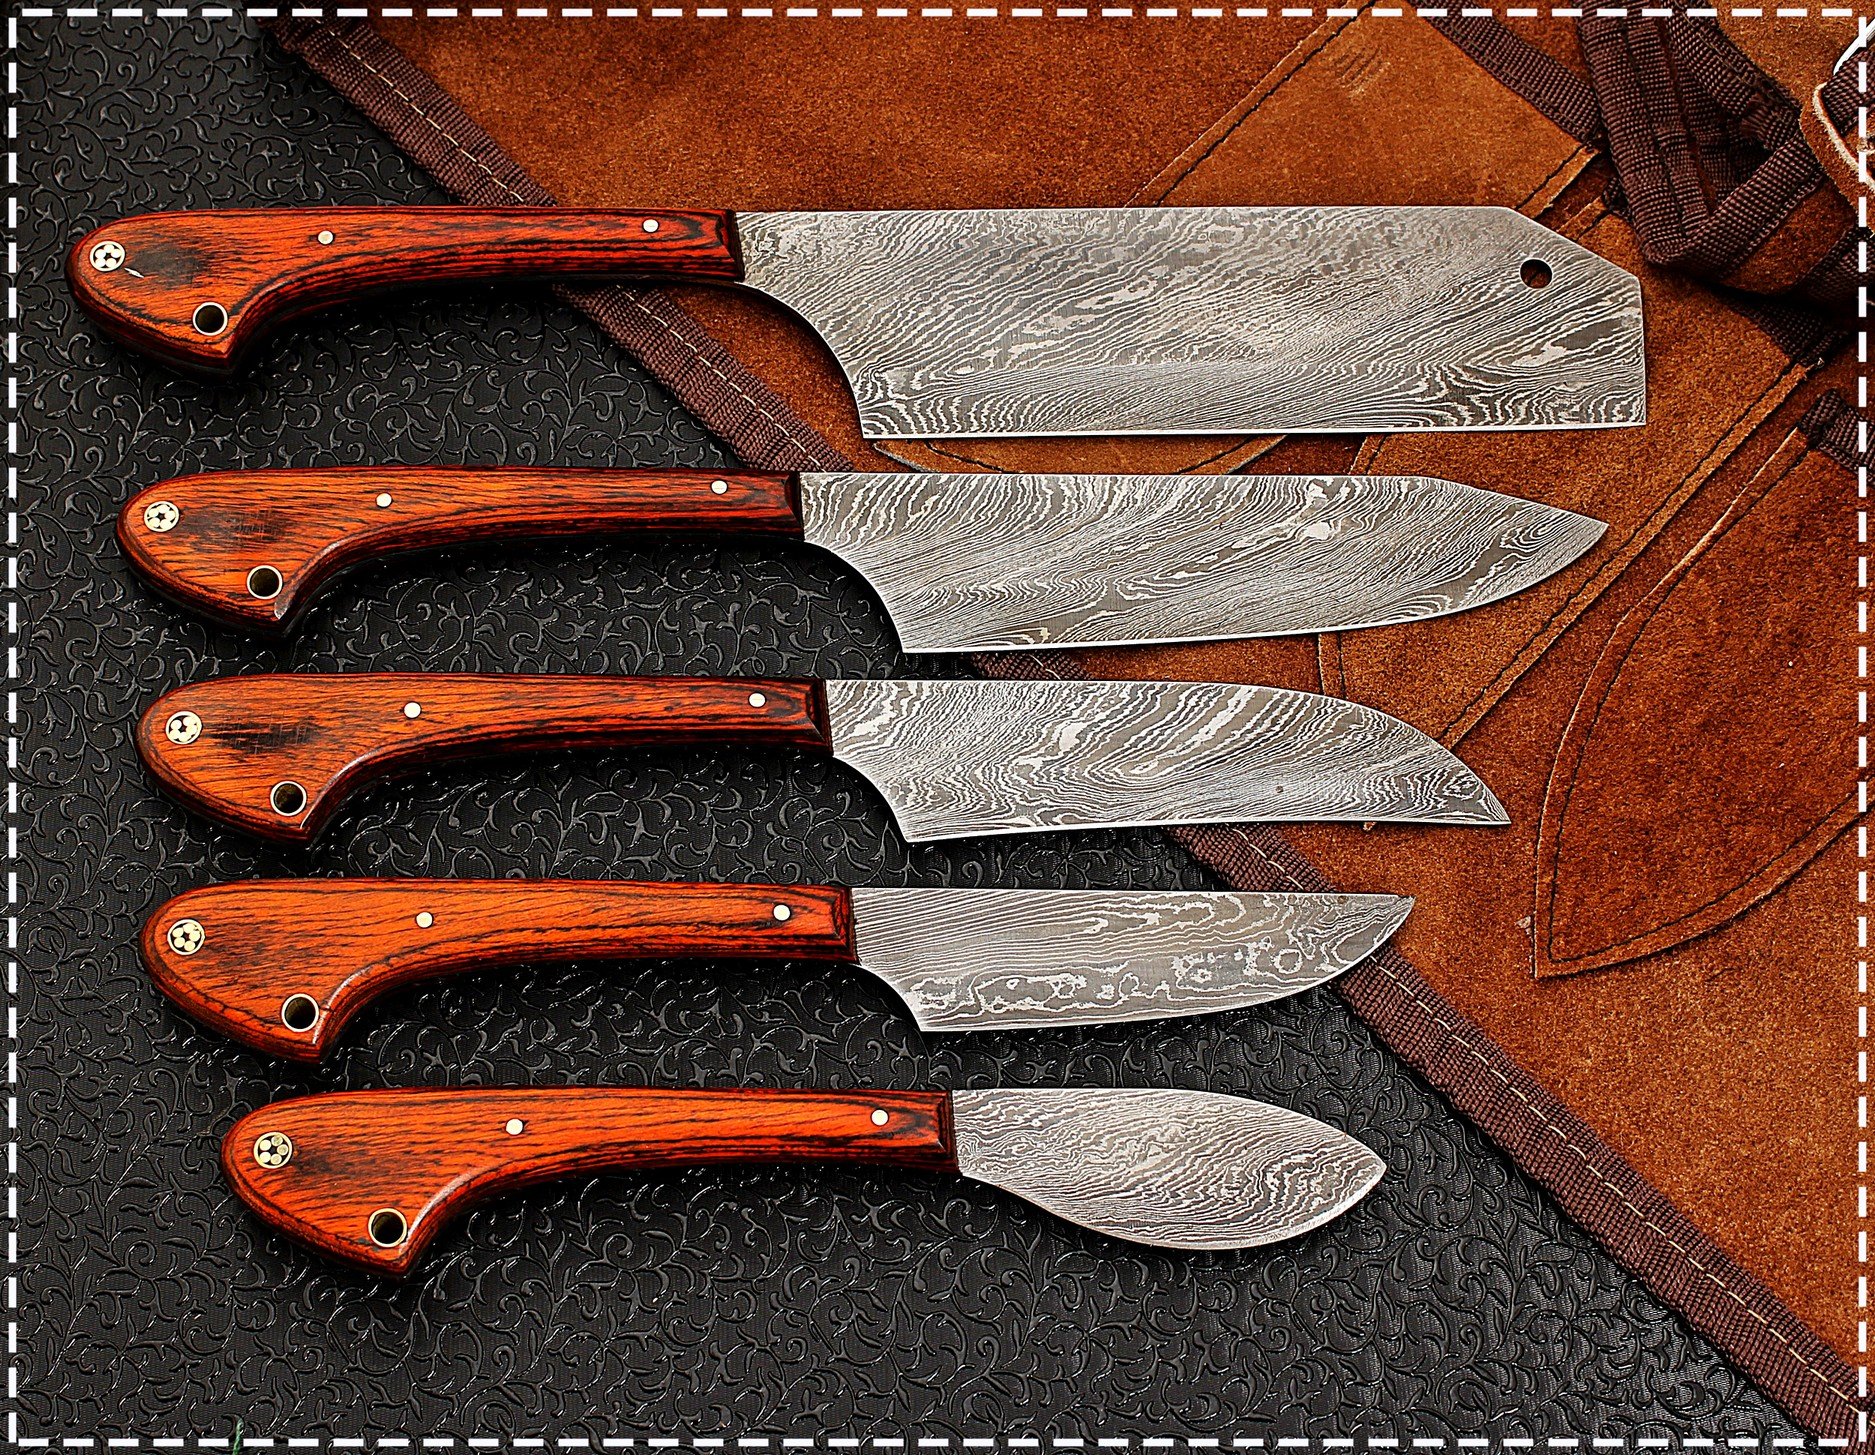 1033 Custom Made Damascus Steel 5 pcs Professional Kitchen Chef Knife Set with 5 Pocket Case Chef Knife Roll Bag by GladiatorsGuild (Red)